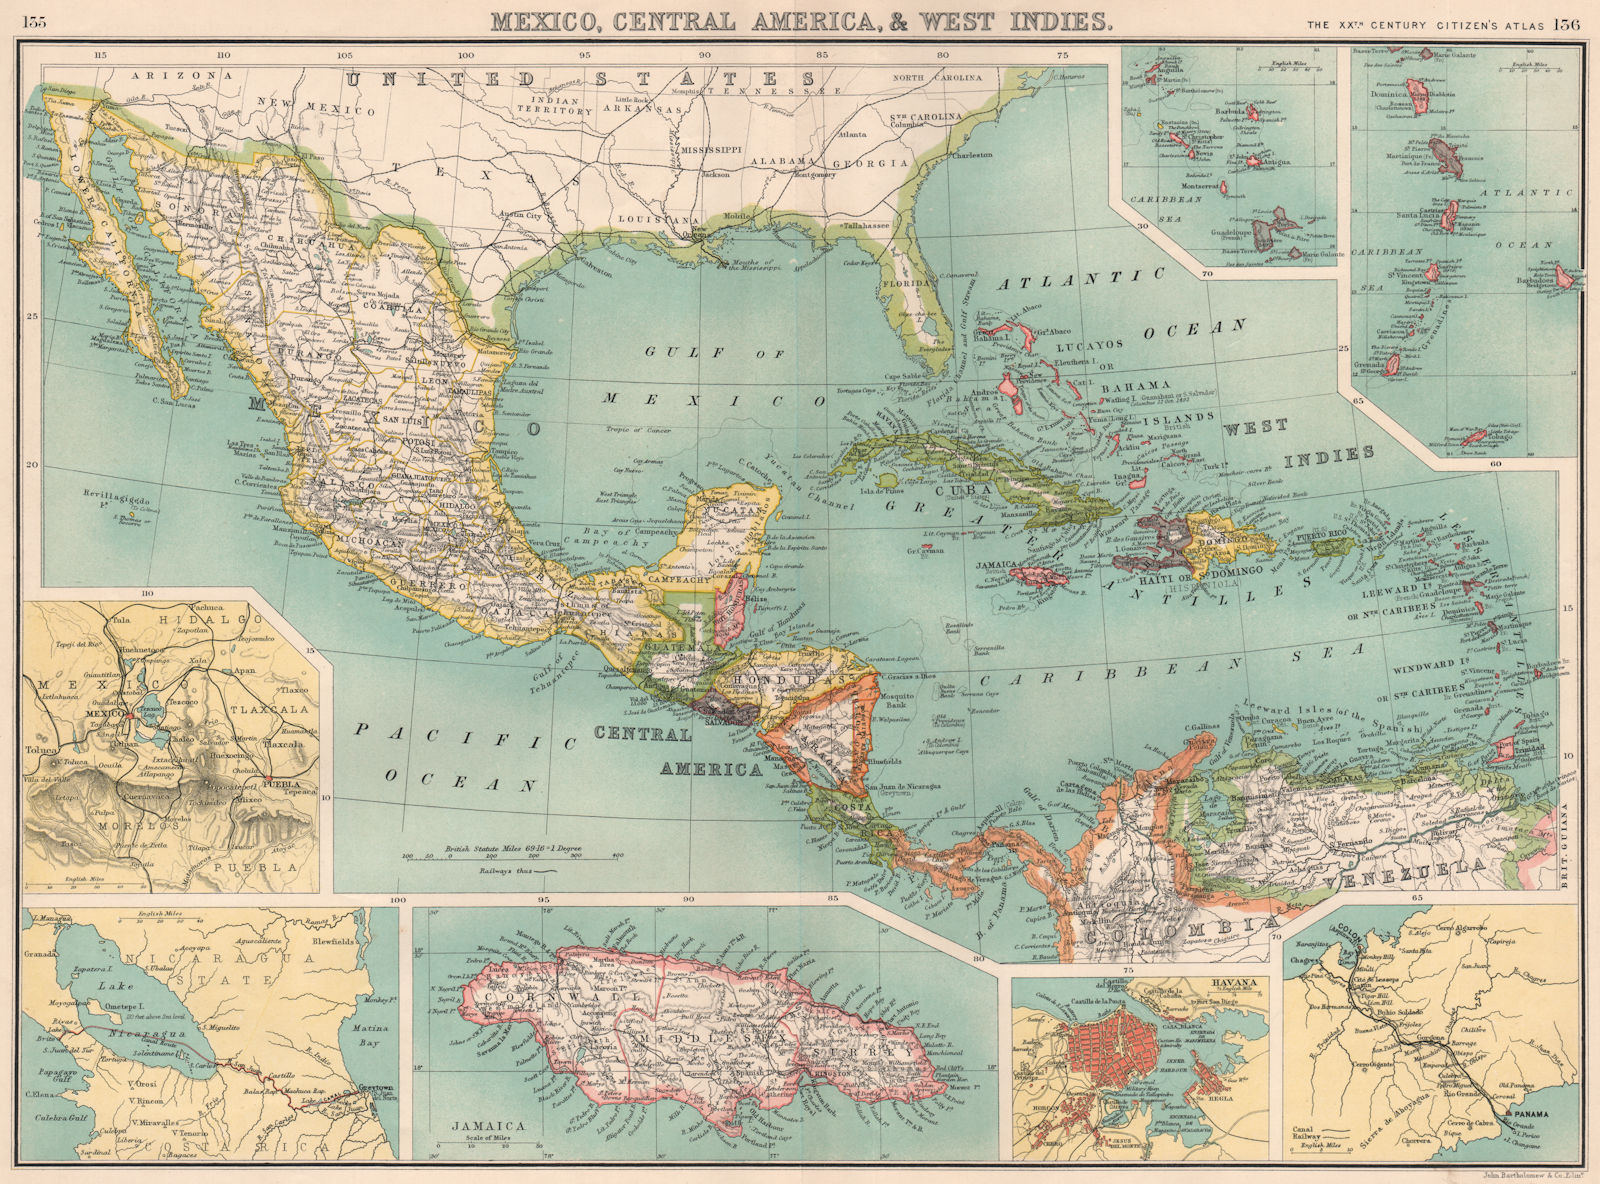 MEXICO CENTRAL AMERICA WEST INDIES. Panama & Proposed Nicaragua canal ...